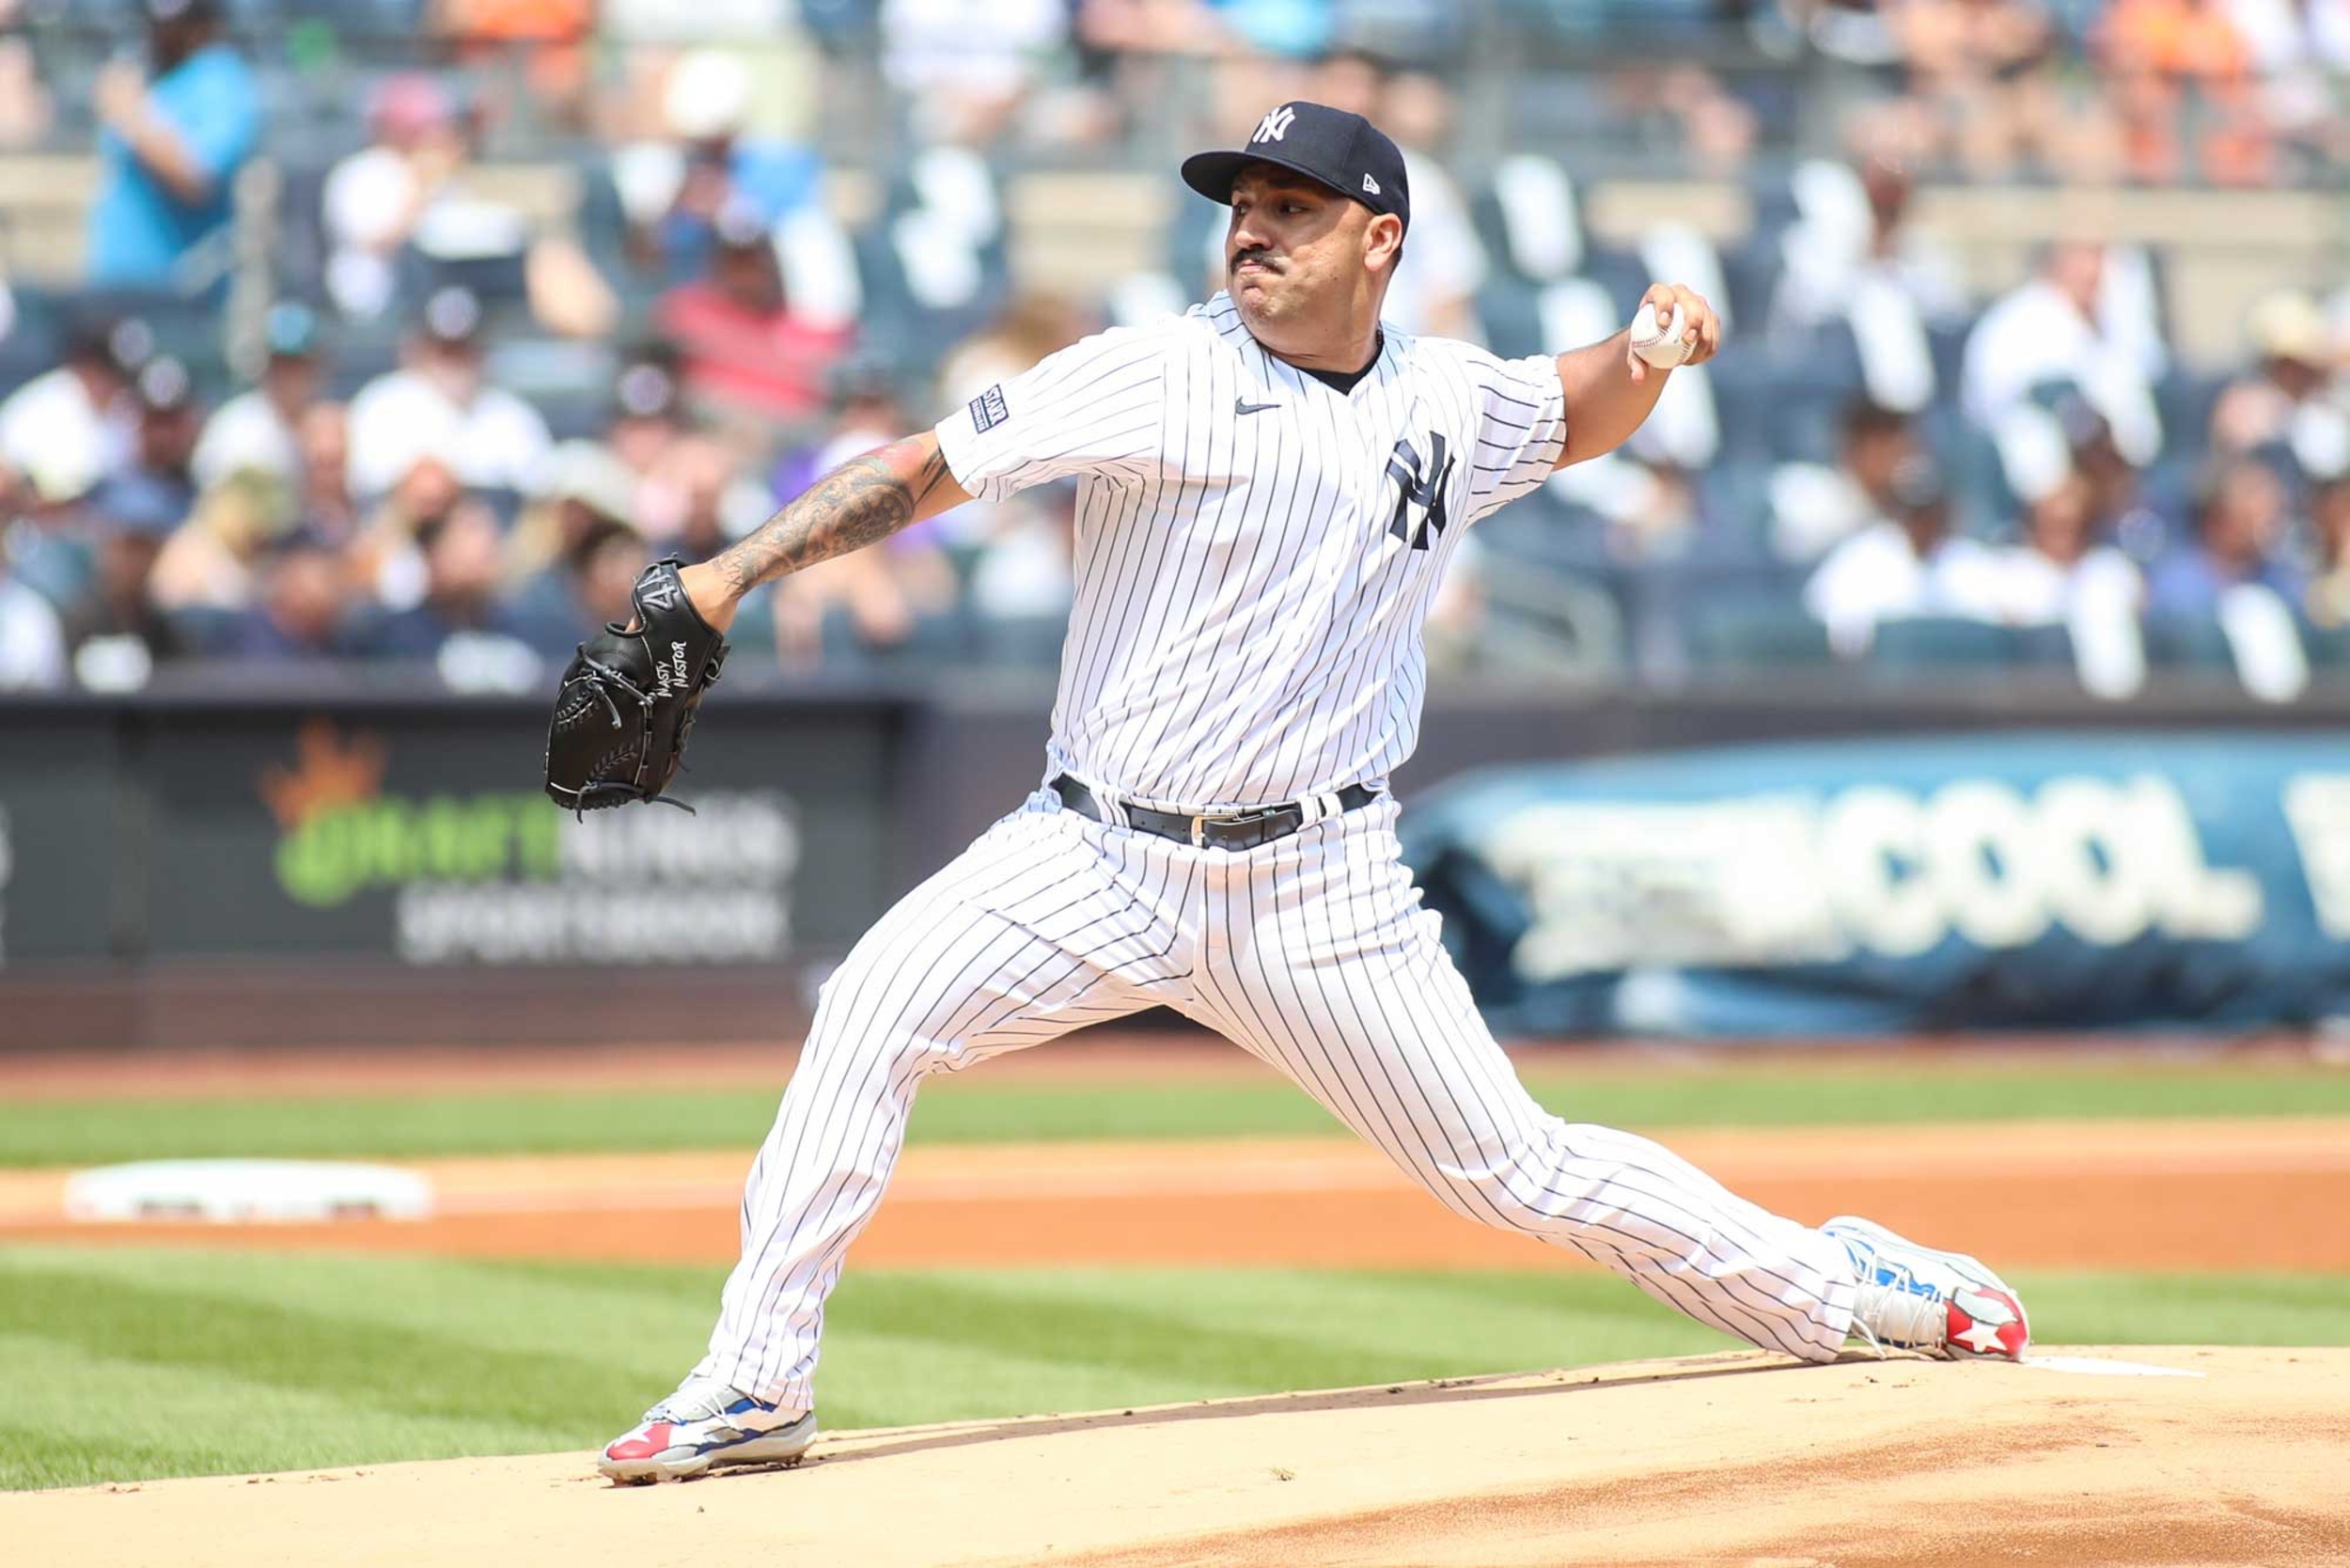 <p>A key part of the Yankees starting rotation in 2021-2022, Cortes started only 12 games last season due to a shoulder injury. There remain questions about his health heading into Spring Training, but the Yankees desperately need Cortes' ace form to return.</p><p>You may also like: <a href='https://www.yardbarker.com/mlb/articles/the_24_best_players_in_atlanta_braves_history_030924/s1__38522520'>The 24 best players in Atlanta Braves history</a></p>